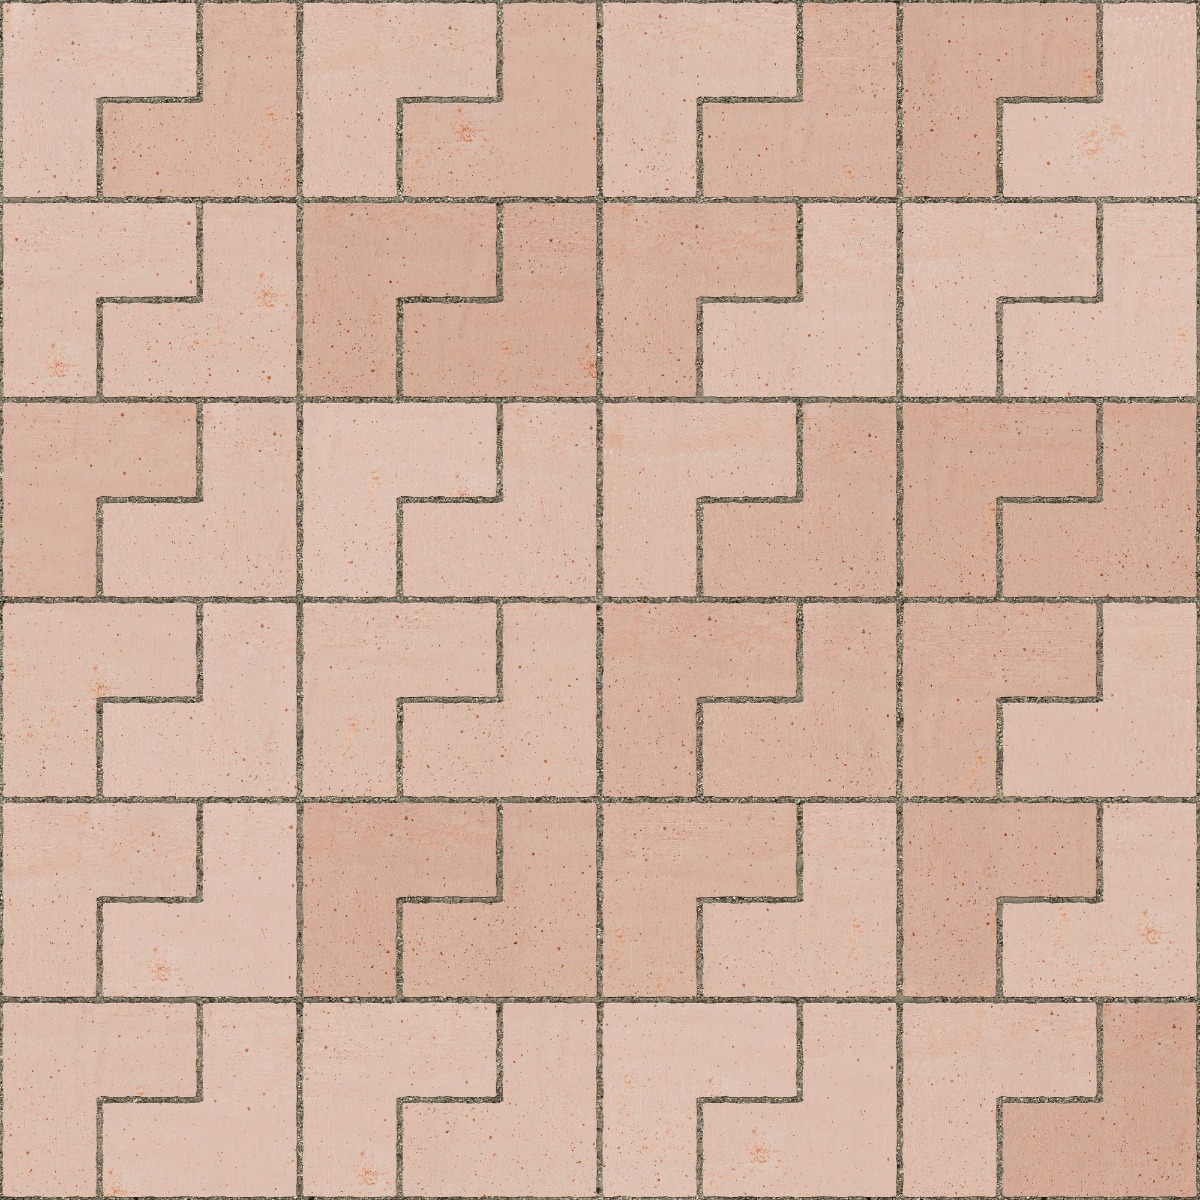 A seamless tile texture with terracotta tiles arranged in a Interlocking Rectangle Pavers pattern